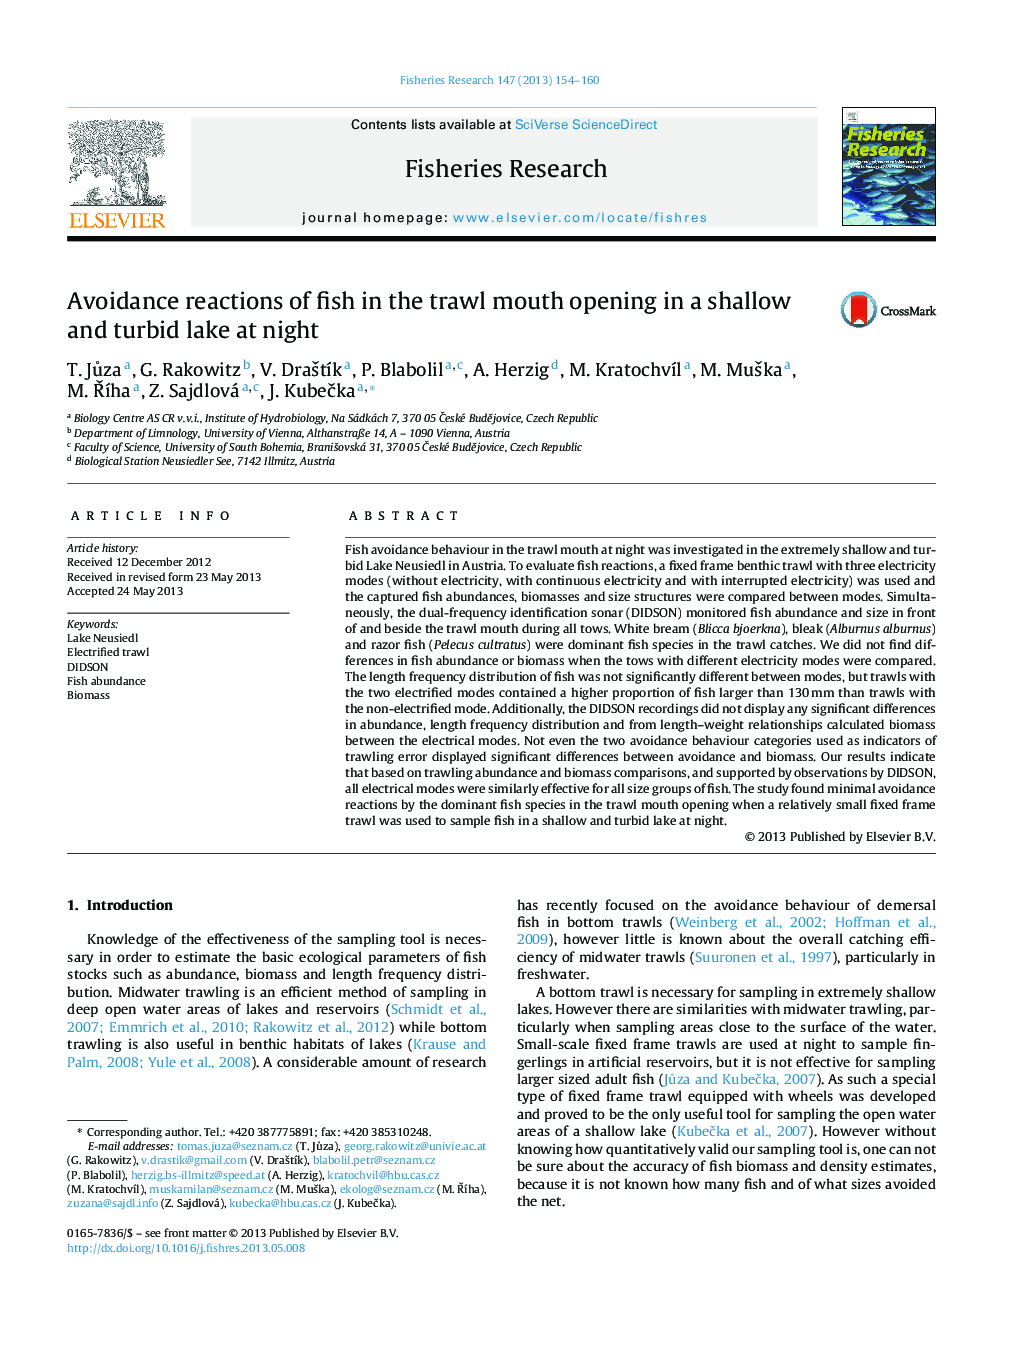 Avoidance reactions of fish in the trawl mouth opening in a shallow and turbid lake at night